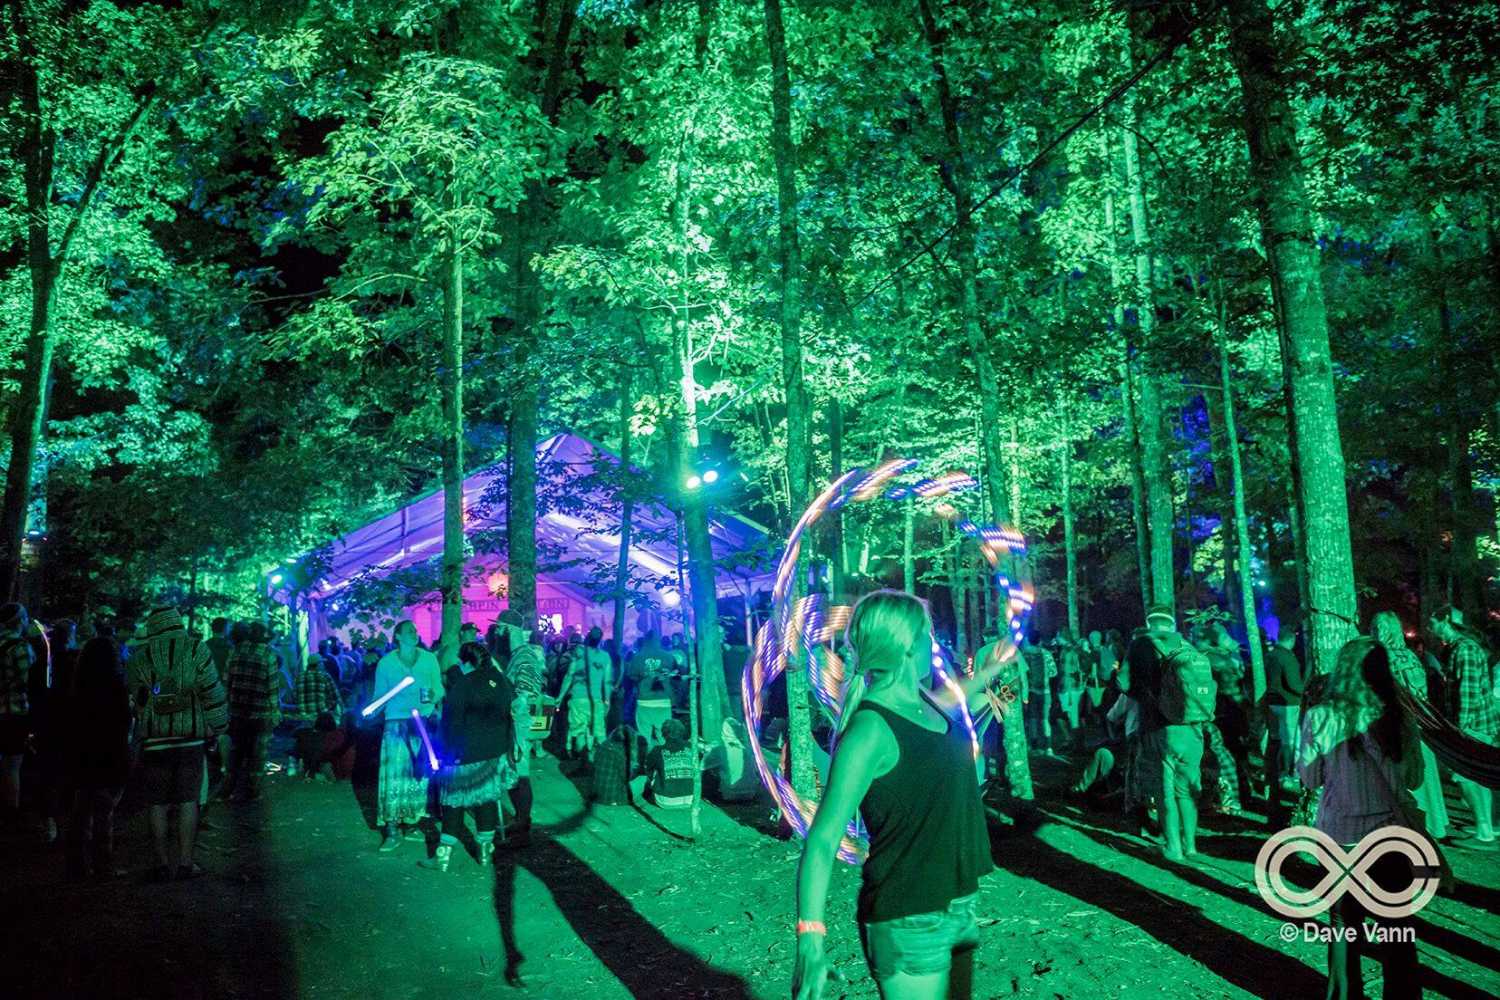 The glowing forest provided a colourful backdrop for the music on the stage